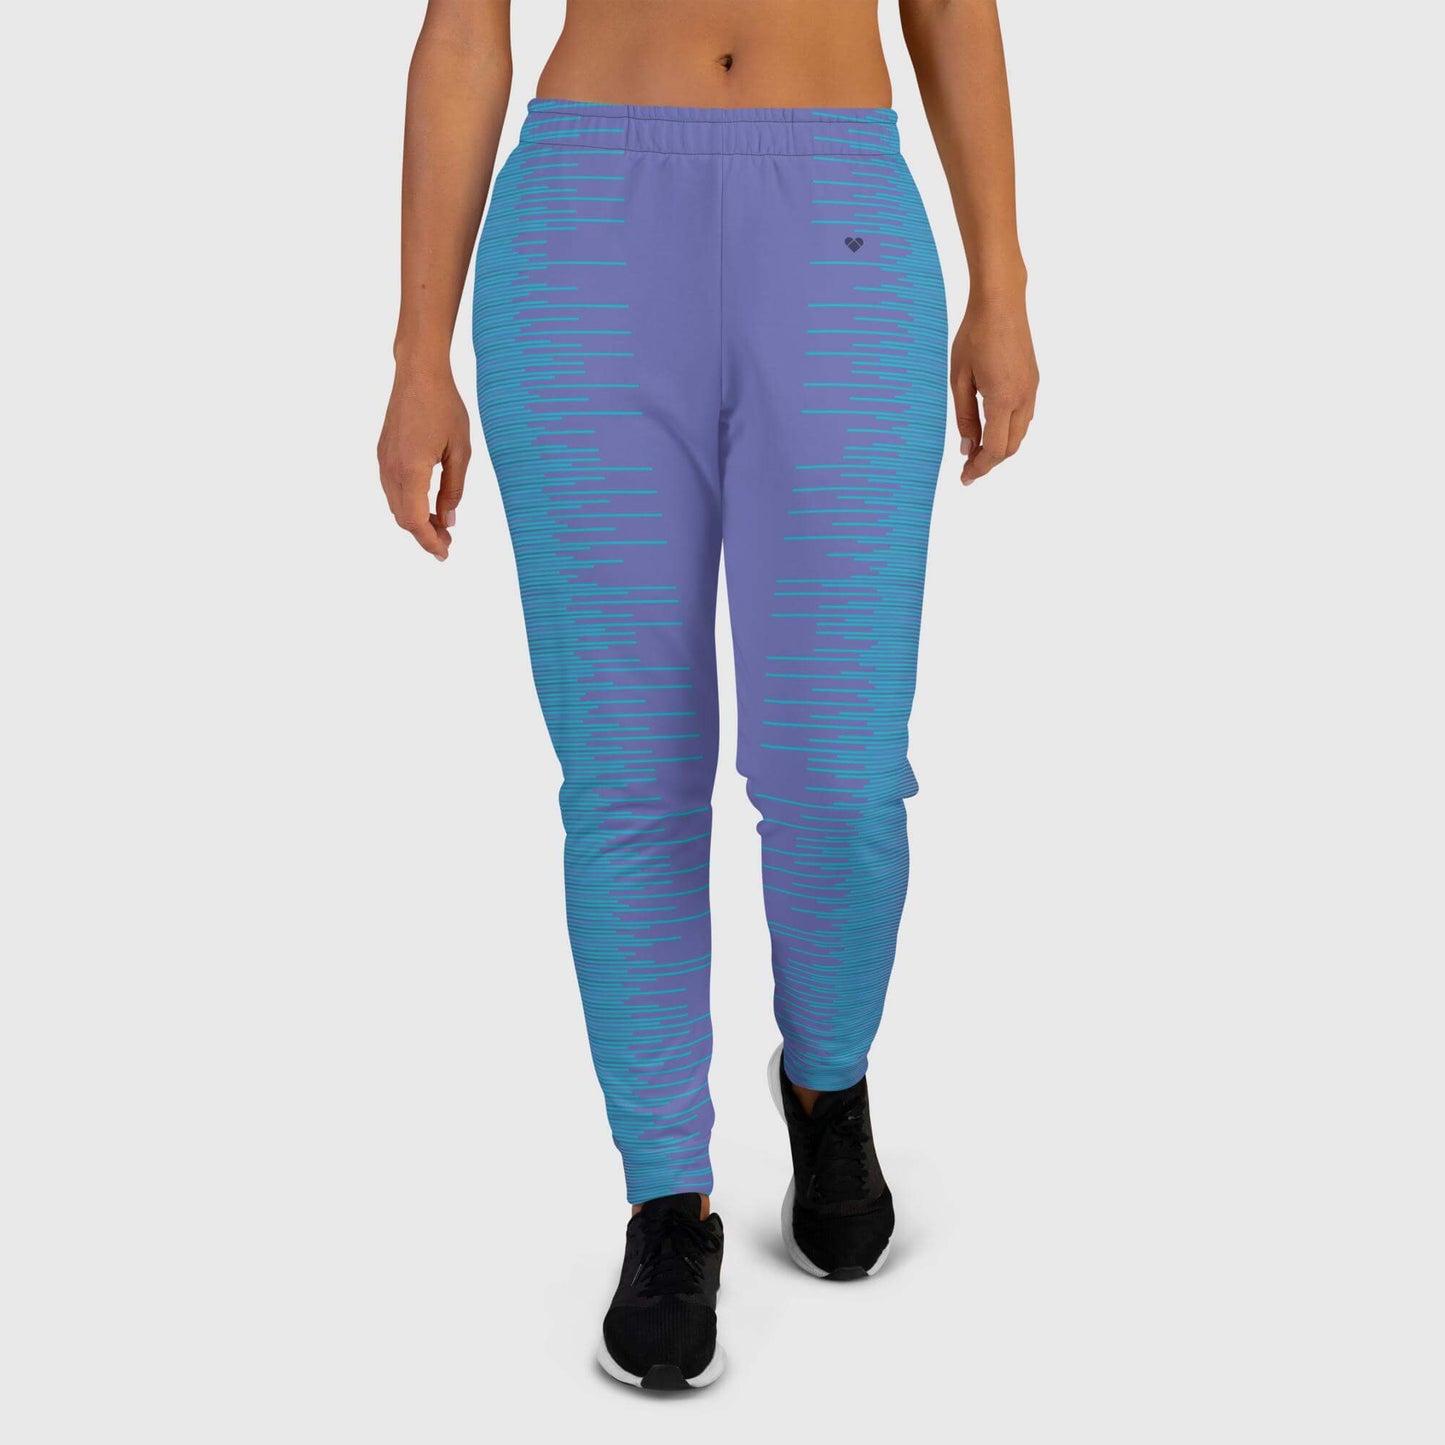 CRiZ AMOR's Women's Joggers - The Perfect Blend of Comfort and Style